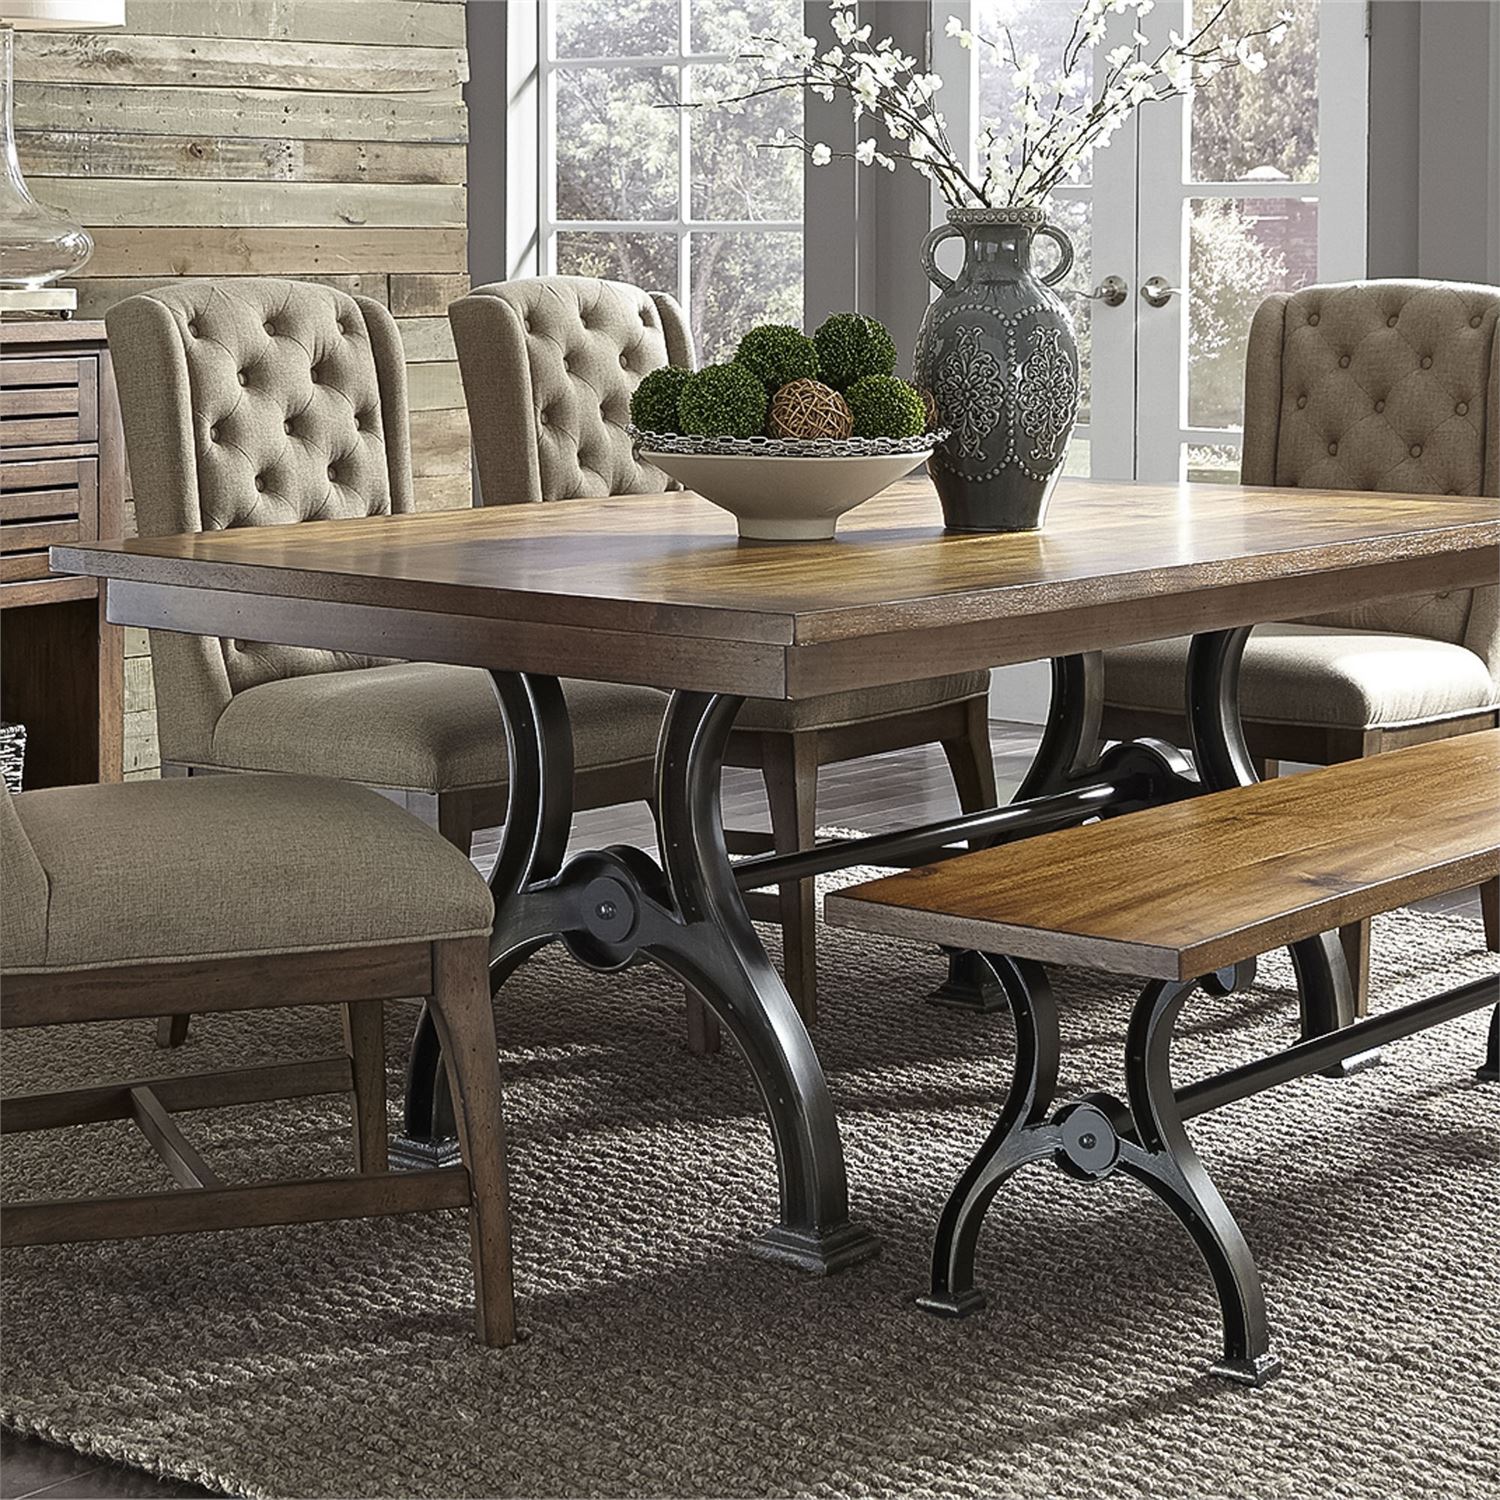 6 piece dining room set in Cobblestone Brown Finish